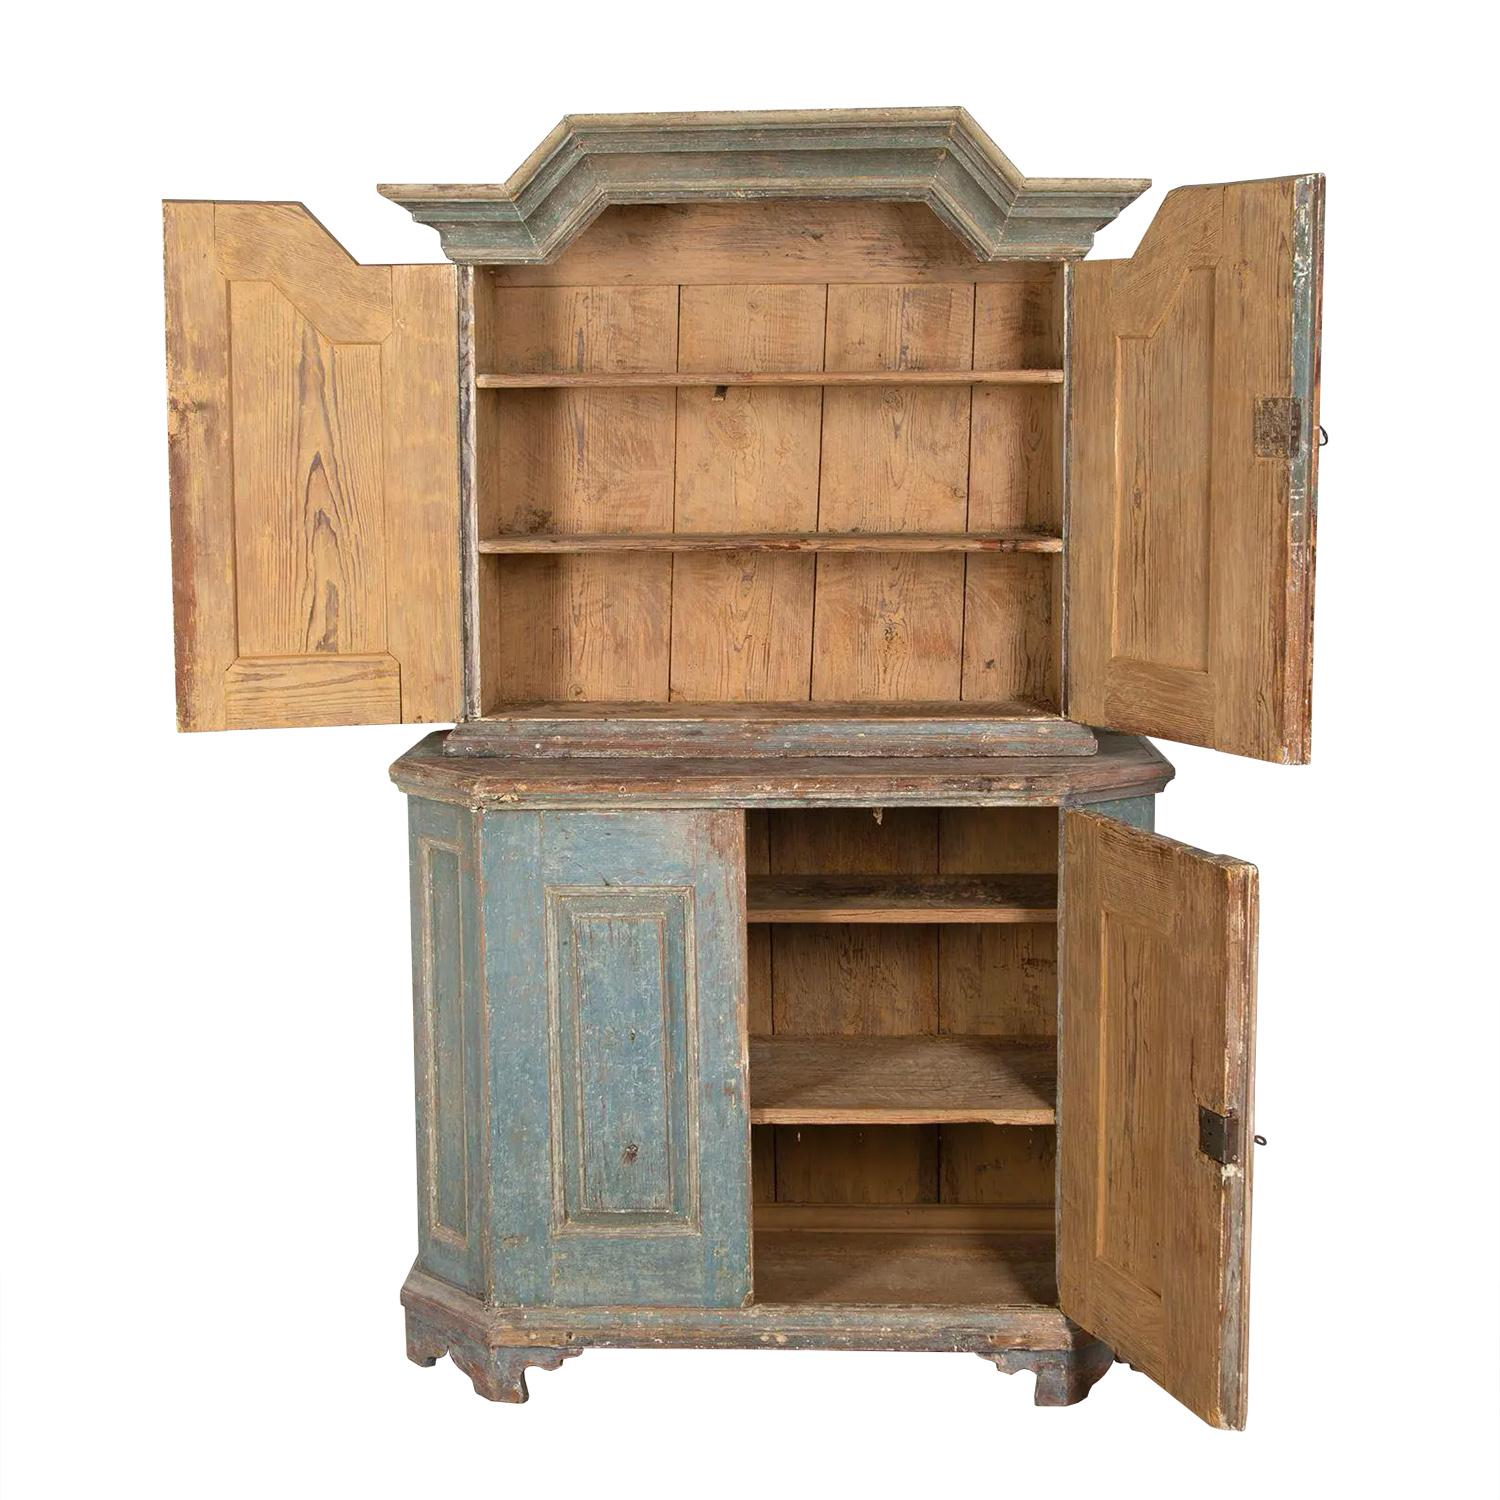 Swedish two part cabinet with a decorative deep pediment. The top portion opens to shelving for storage. The bottom section features decorative panelling to the four panels, opening to further storage. This piece has been dry scraped to original